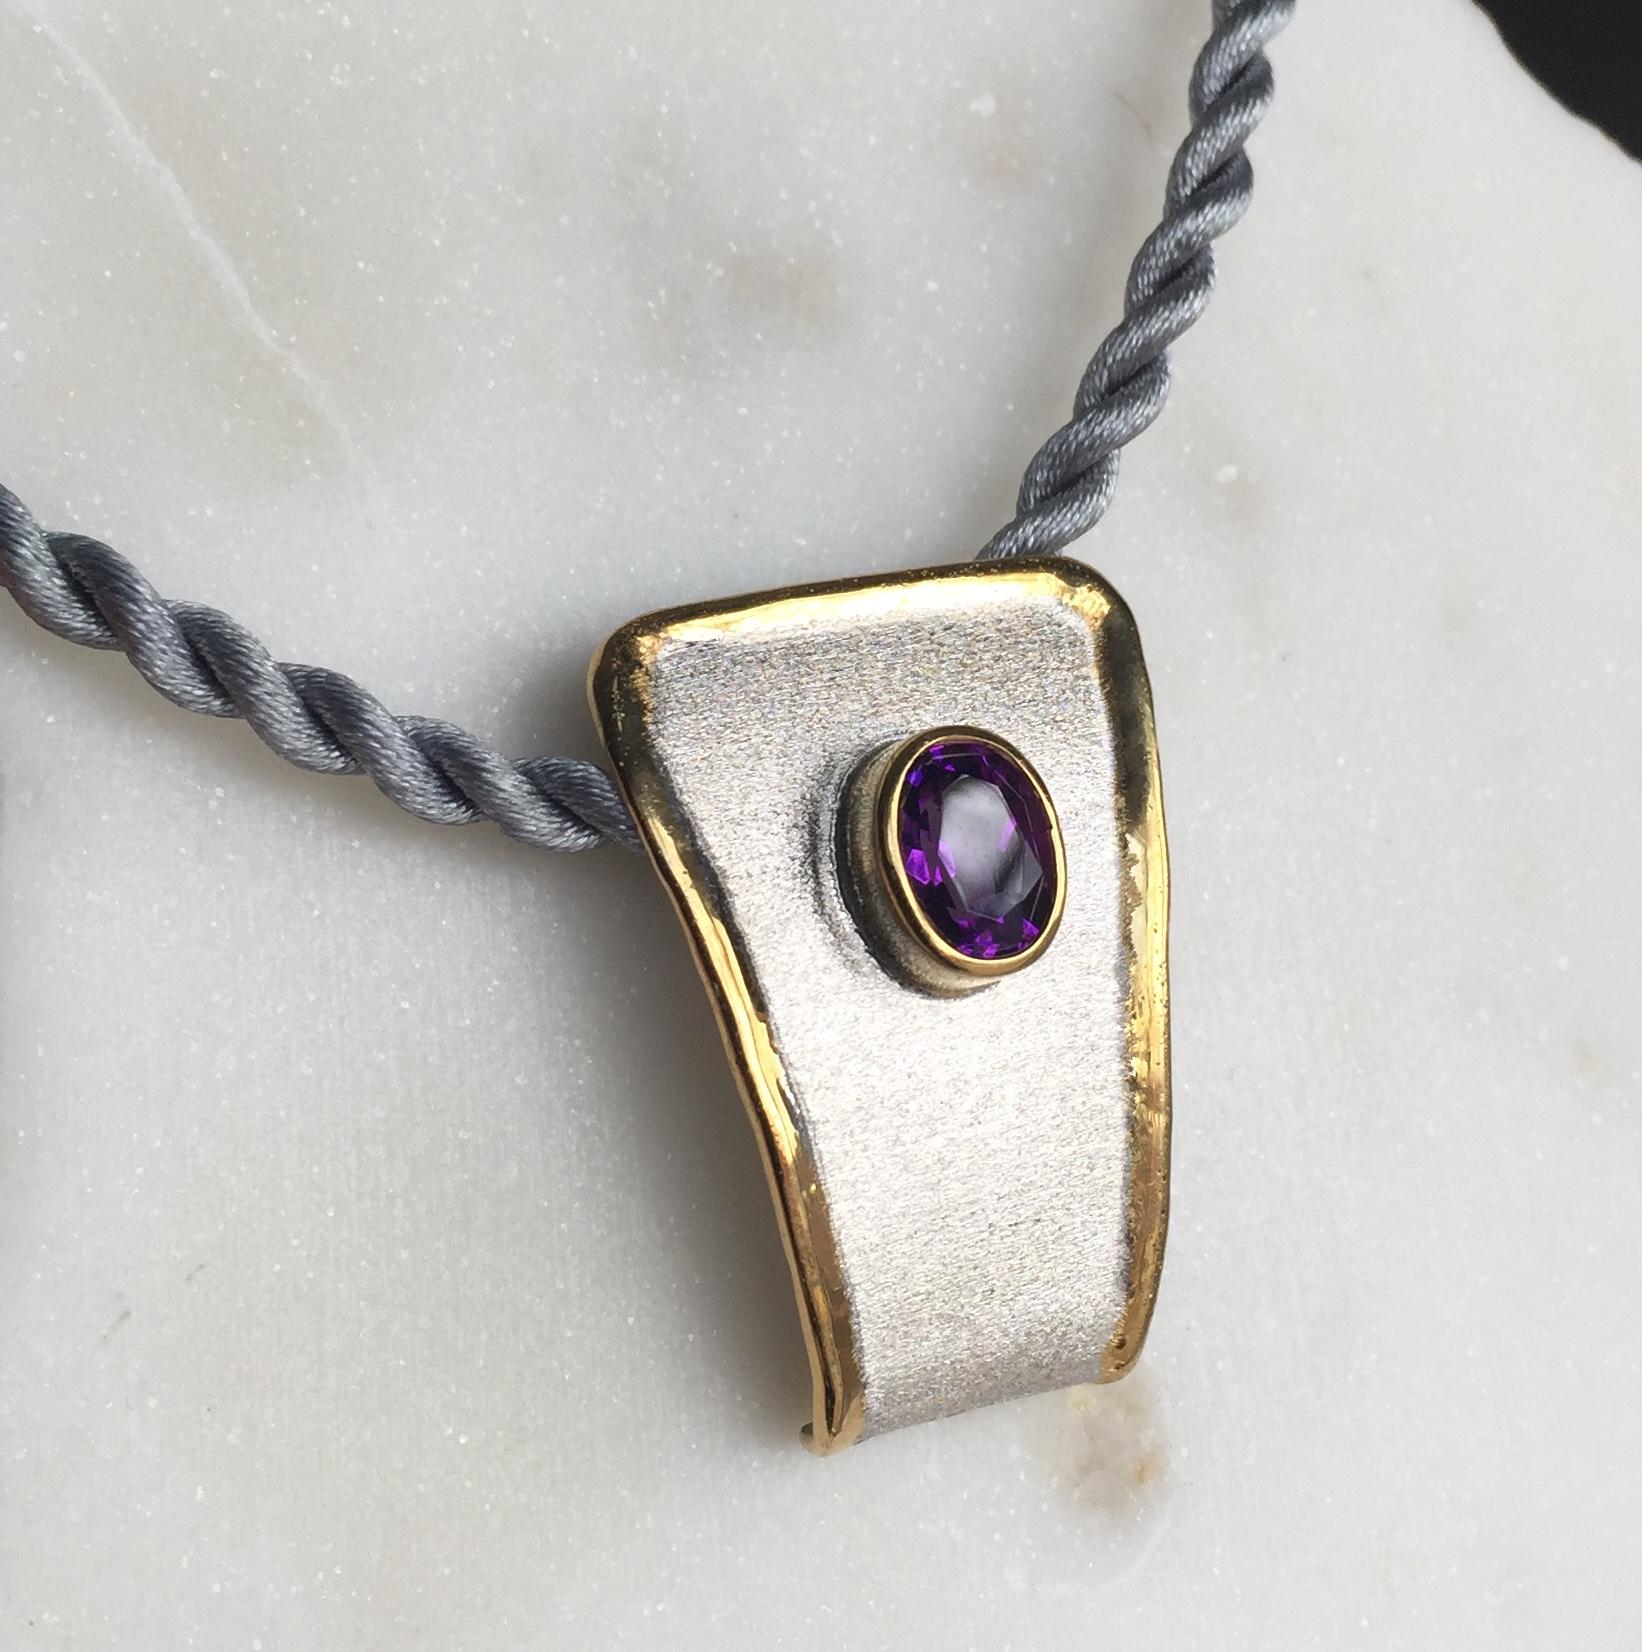 Yianni Creations pendant enhancer from Midas Collection is all handcrafted from fine silver 950 purity and plated with palladium to resist the elements. This stunning artisan pendant attracts by brushed texture and nature-inspired liquid edges in